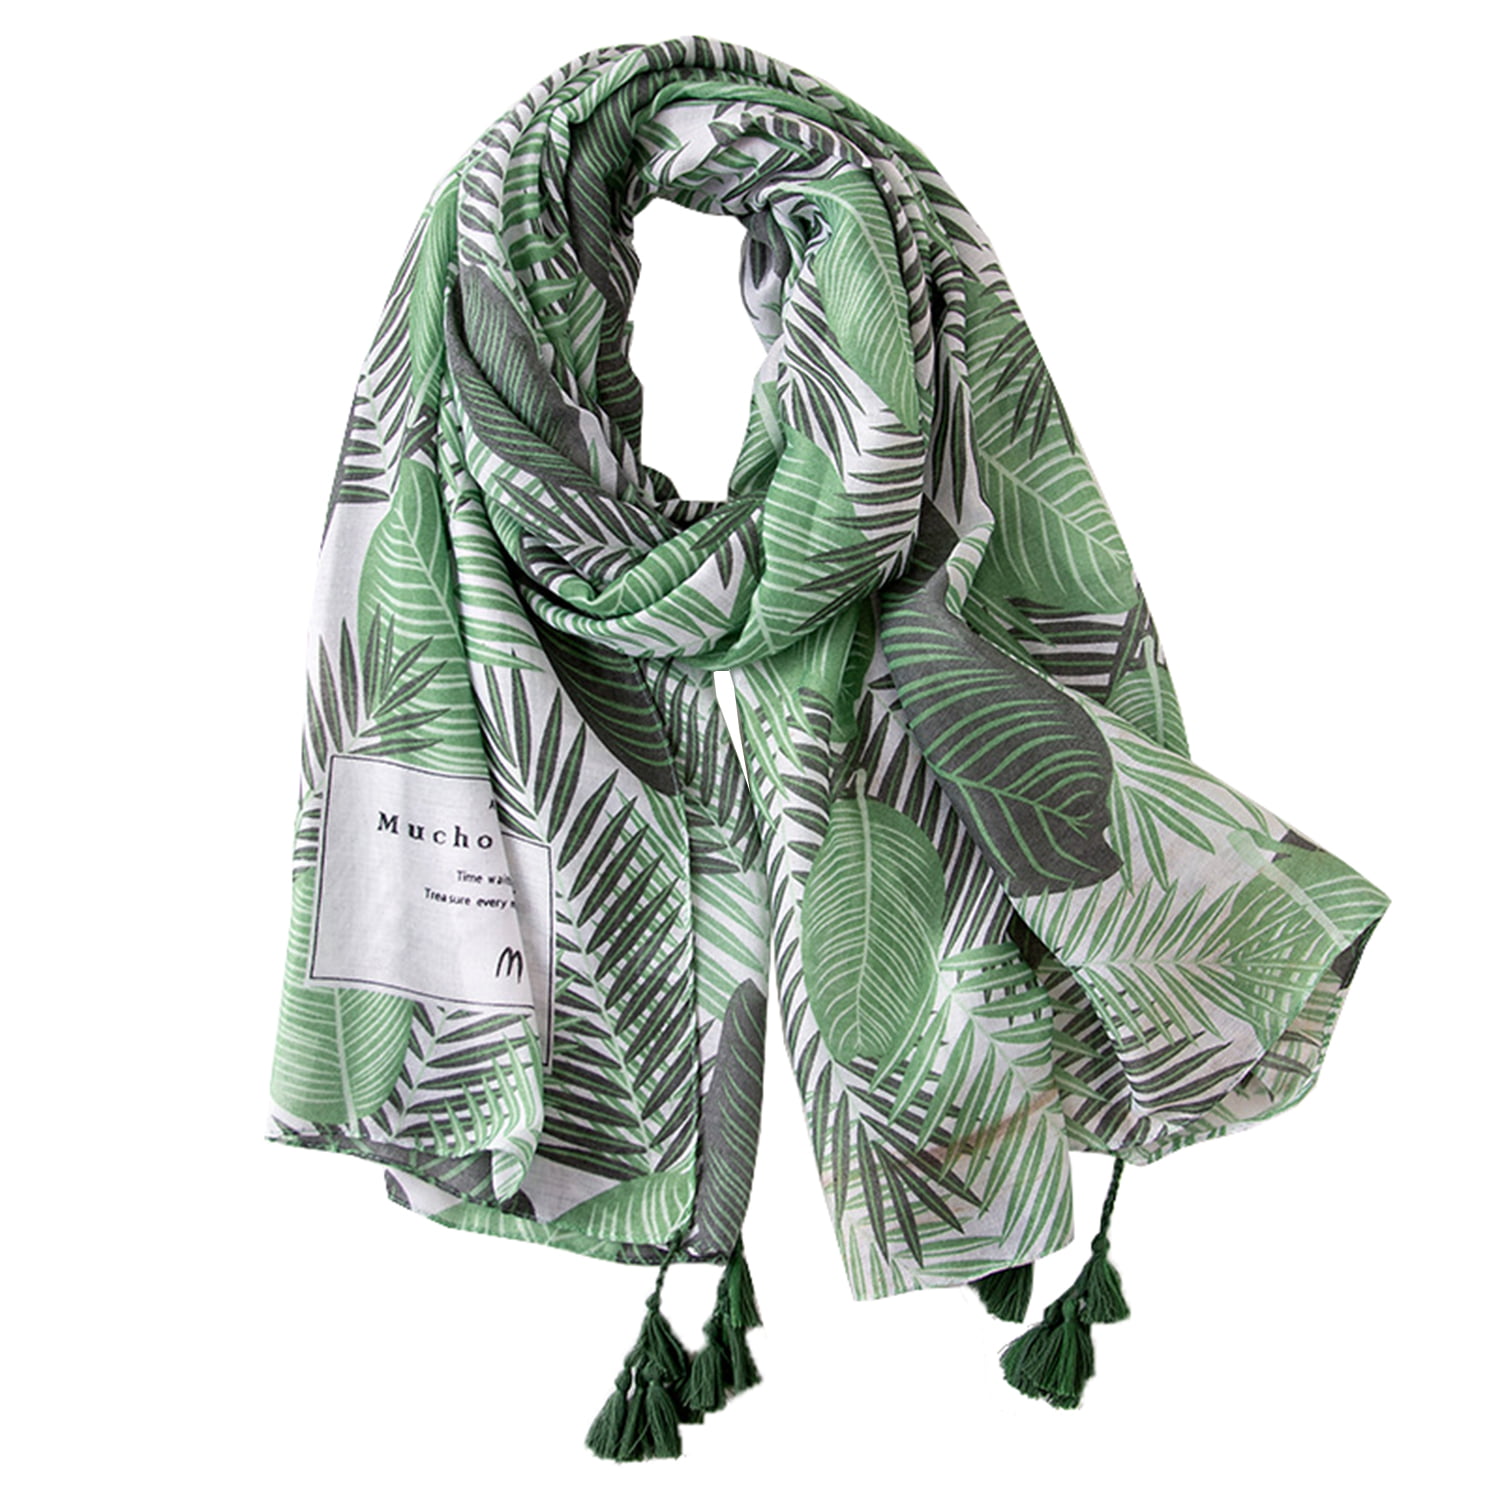 NEW Sheer Green Paisley Summer Scarf Scarve Wrap Long Made in Japan Head Neck 